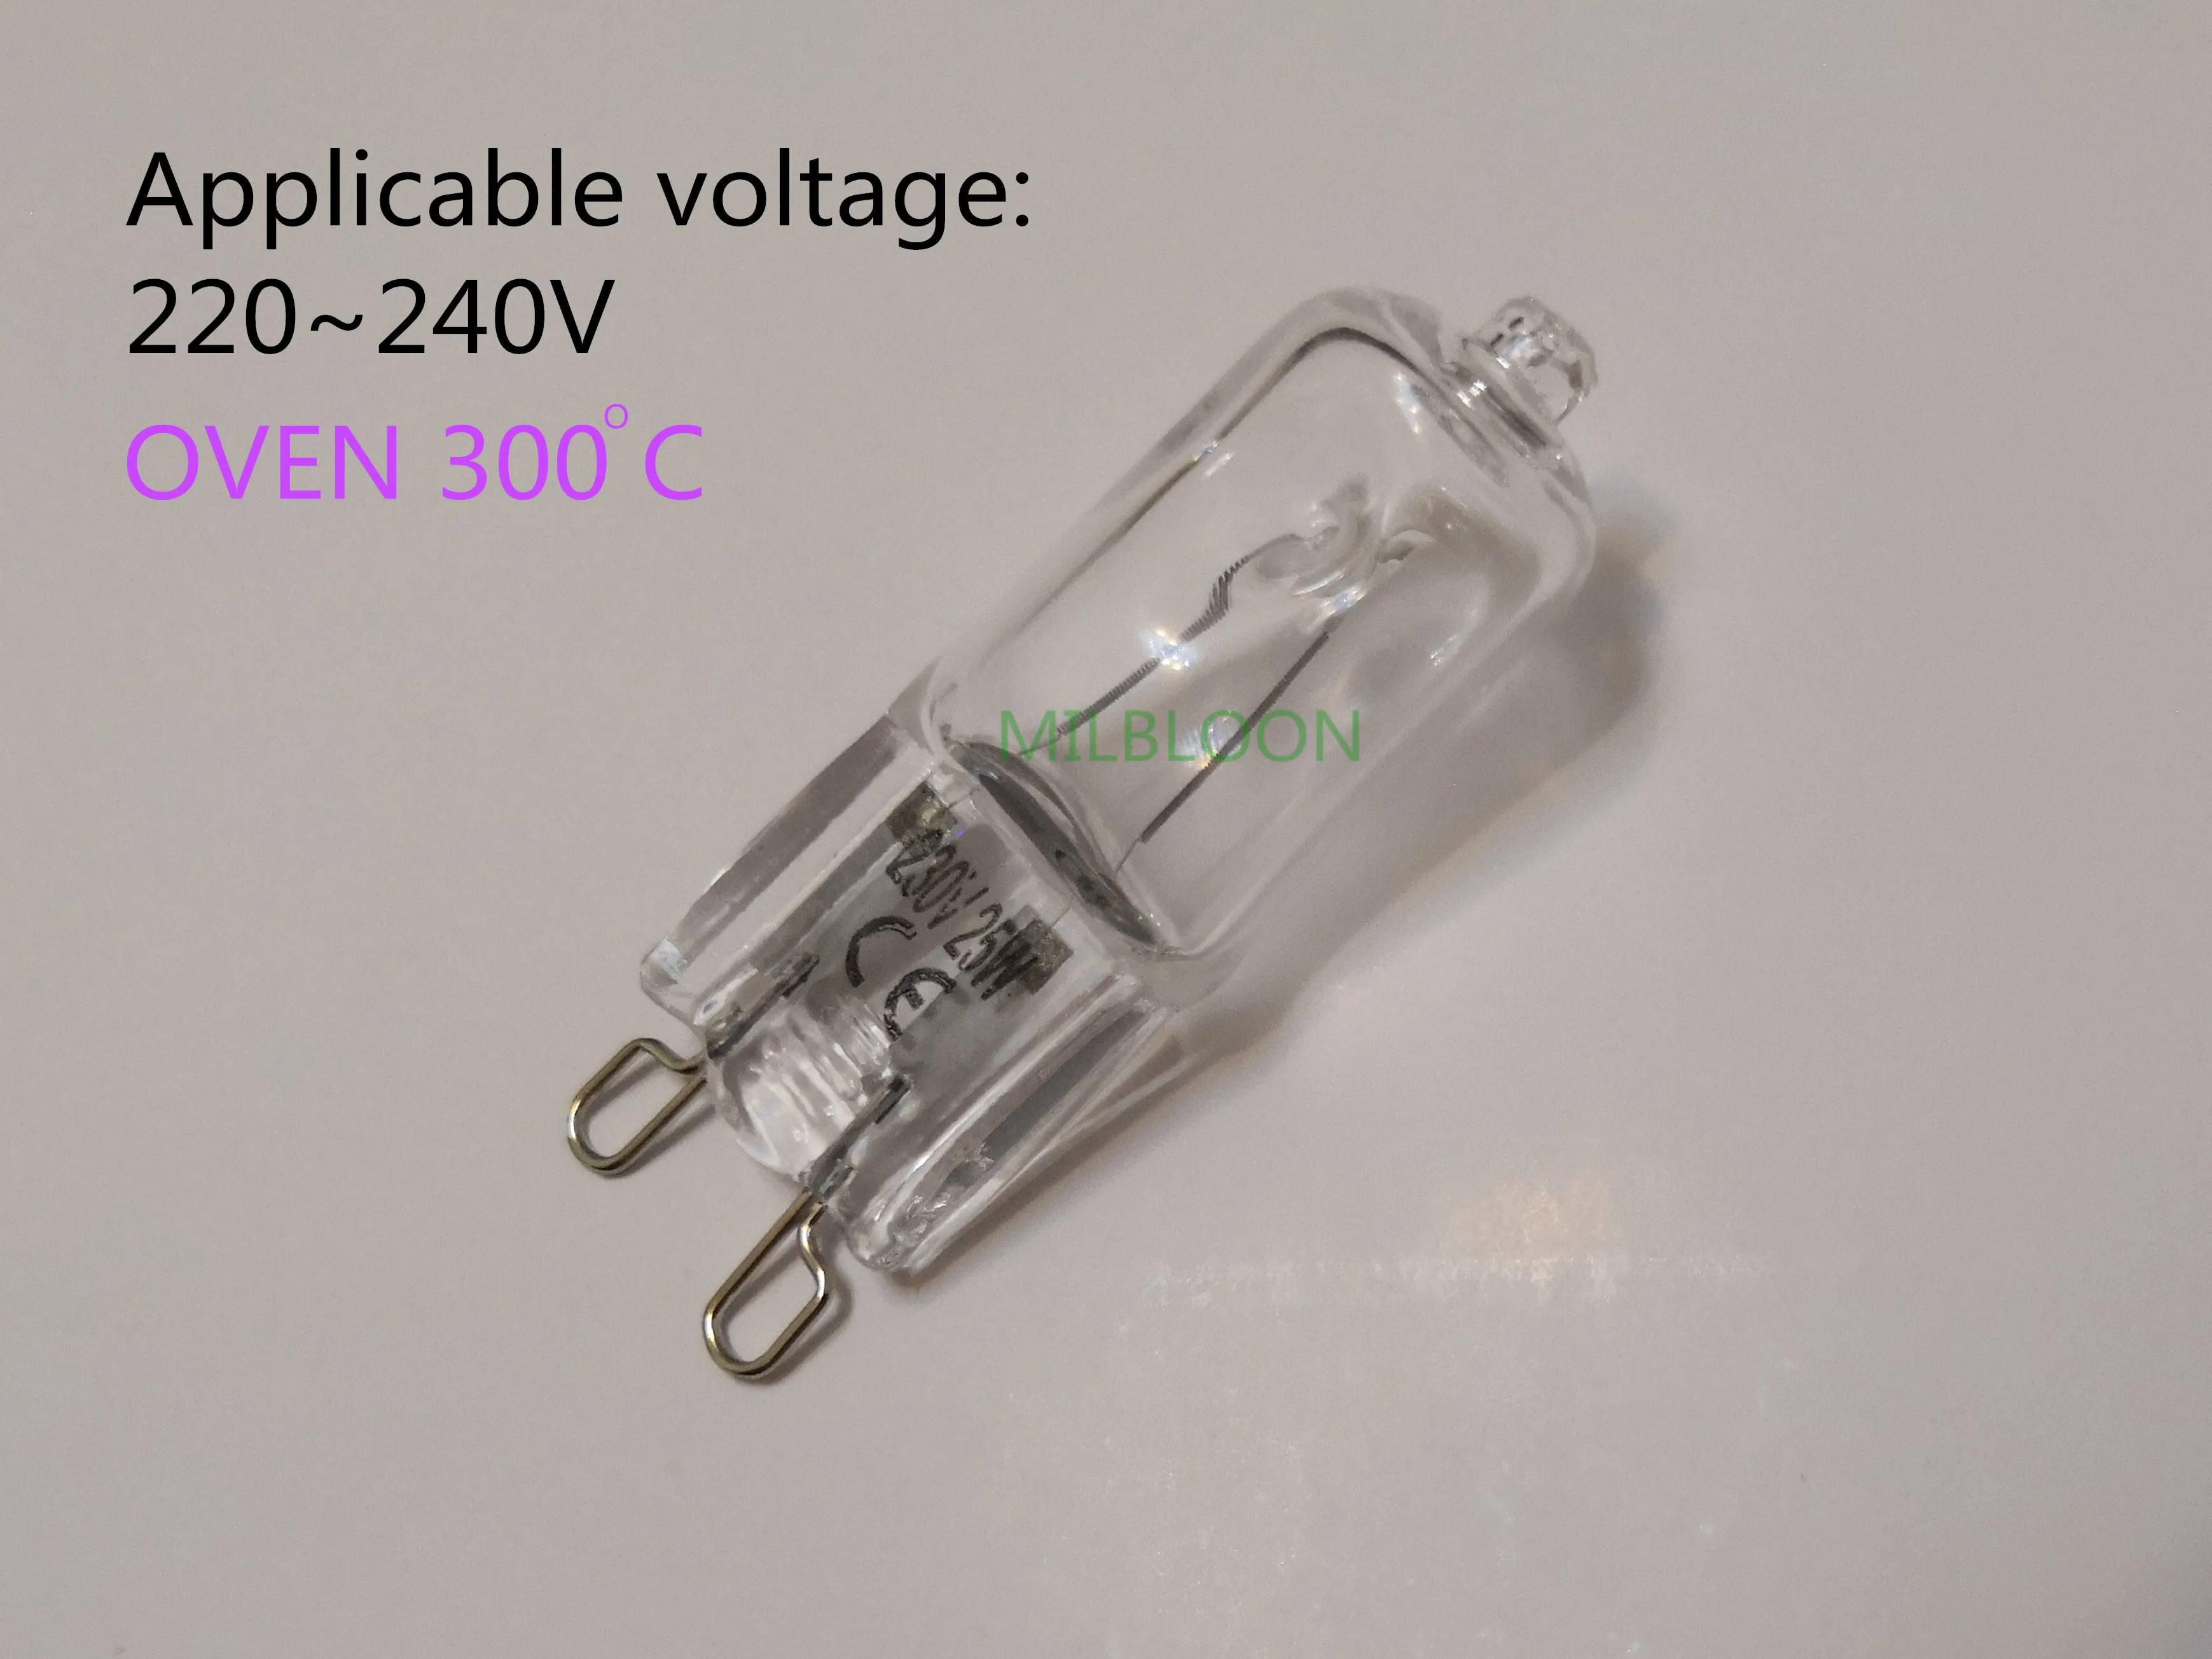 Halogen G9 Oven Bulbs 40W 230V for Oven and Microwave Oven Applications 300